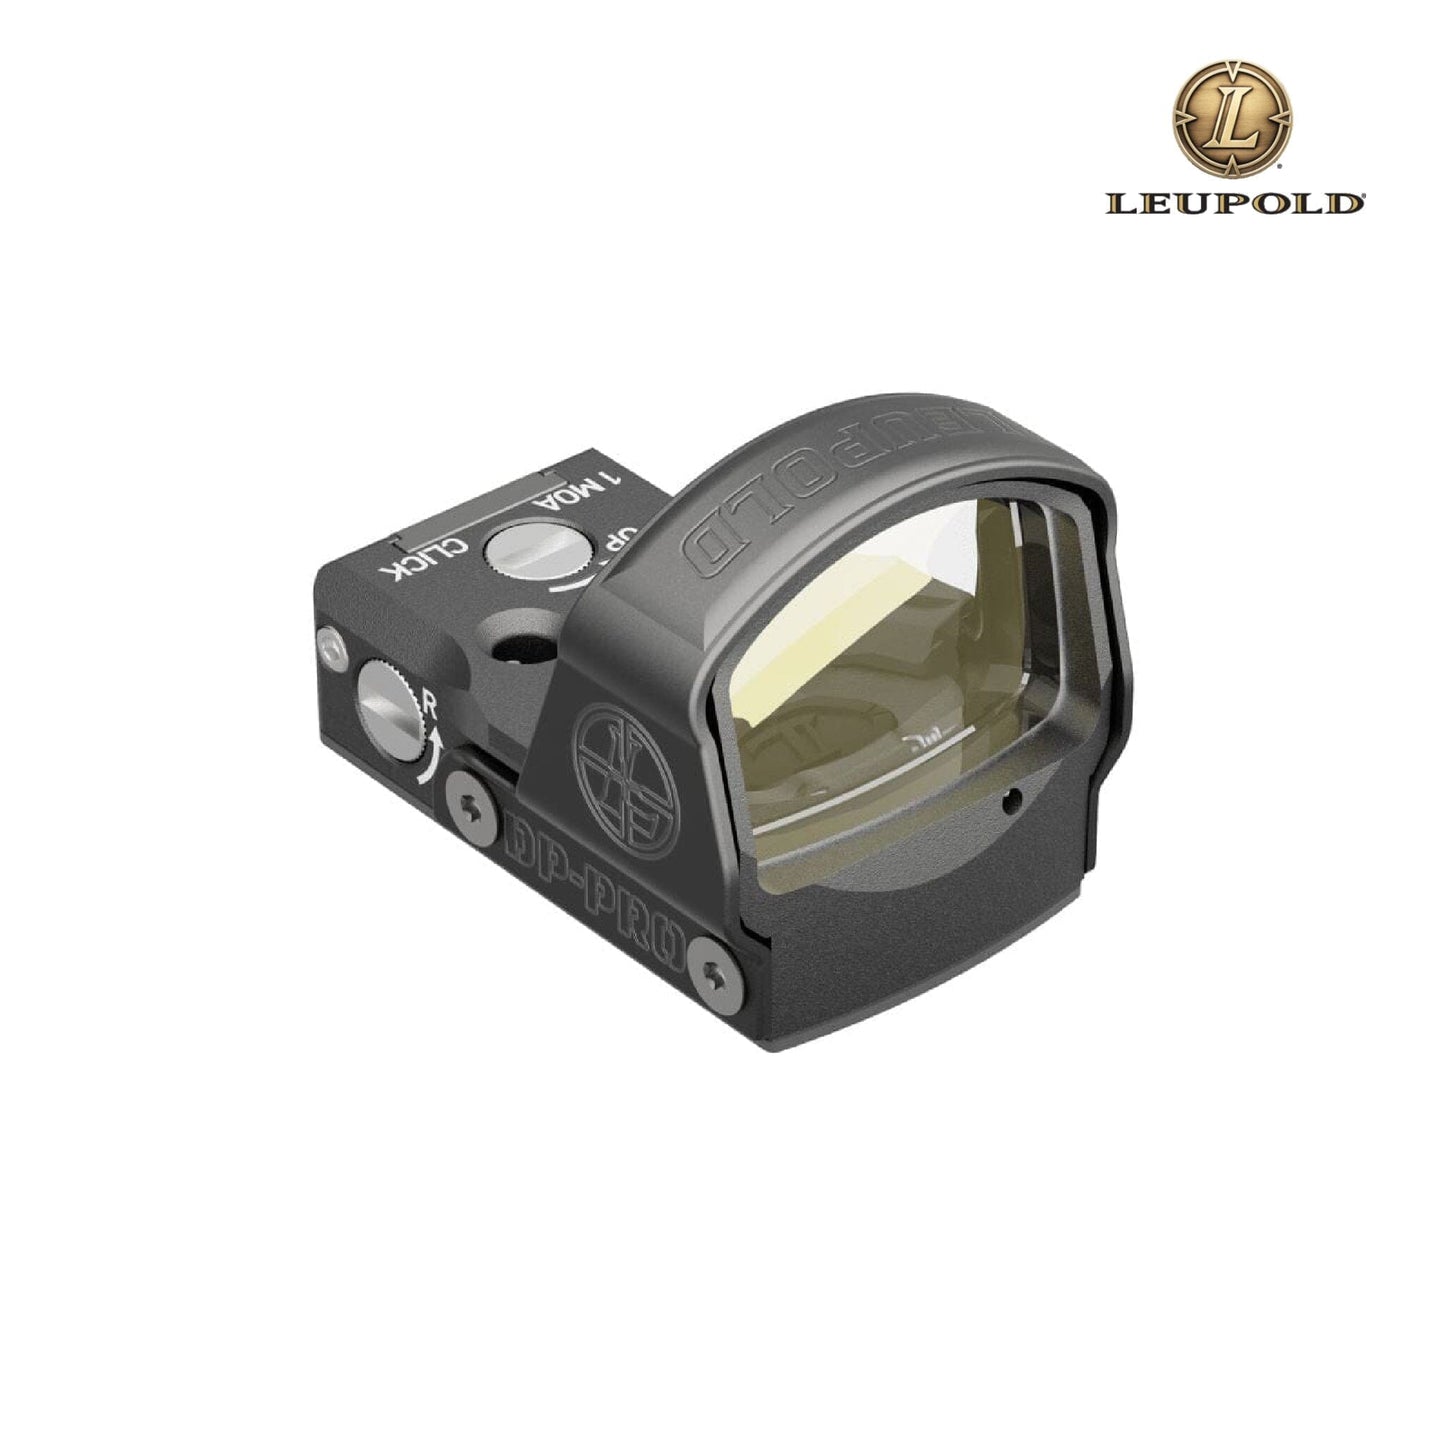 Leupold DeltaPoint PRO NV Red Dot Sight 2.5 MOA Dot Reticle Black 179585 Red Dot Sight Leupold 